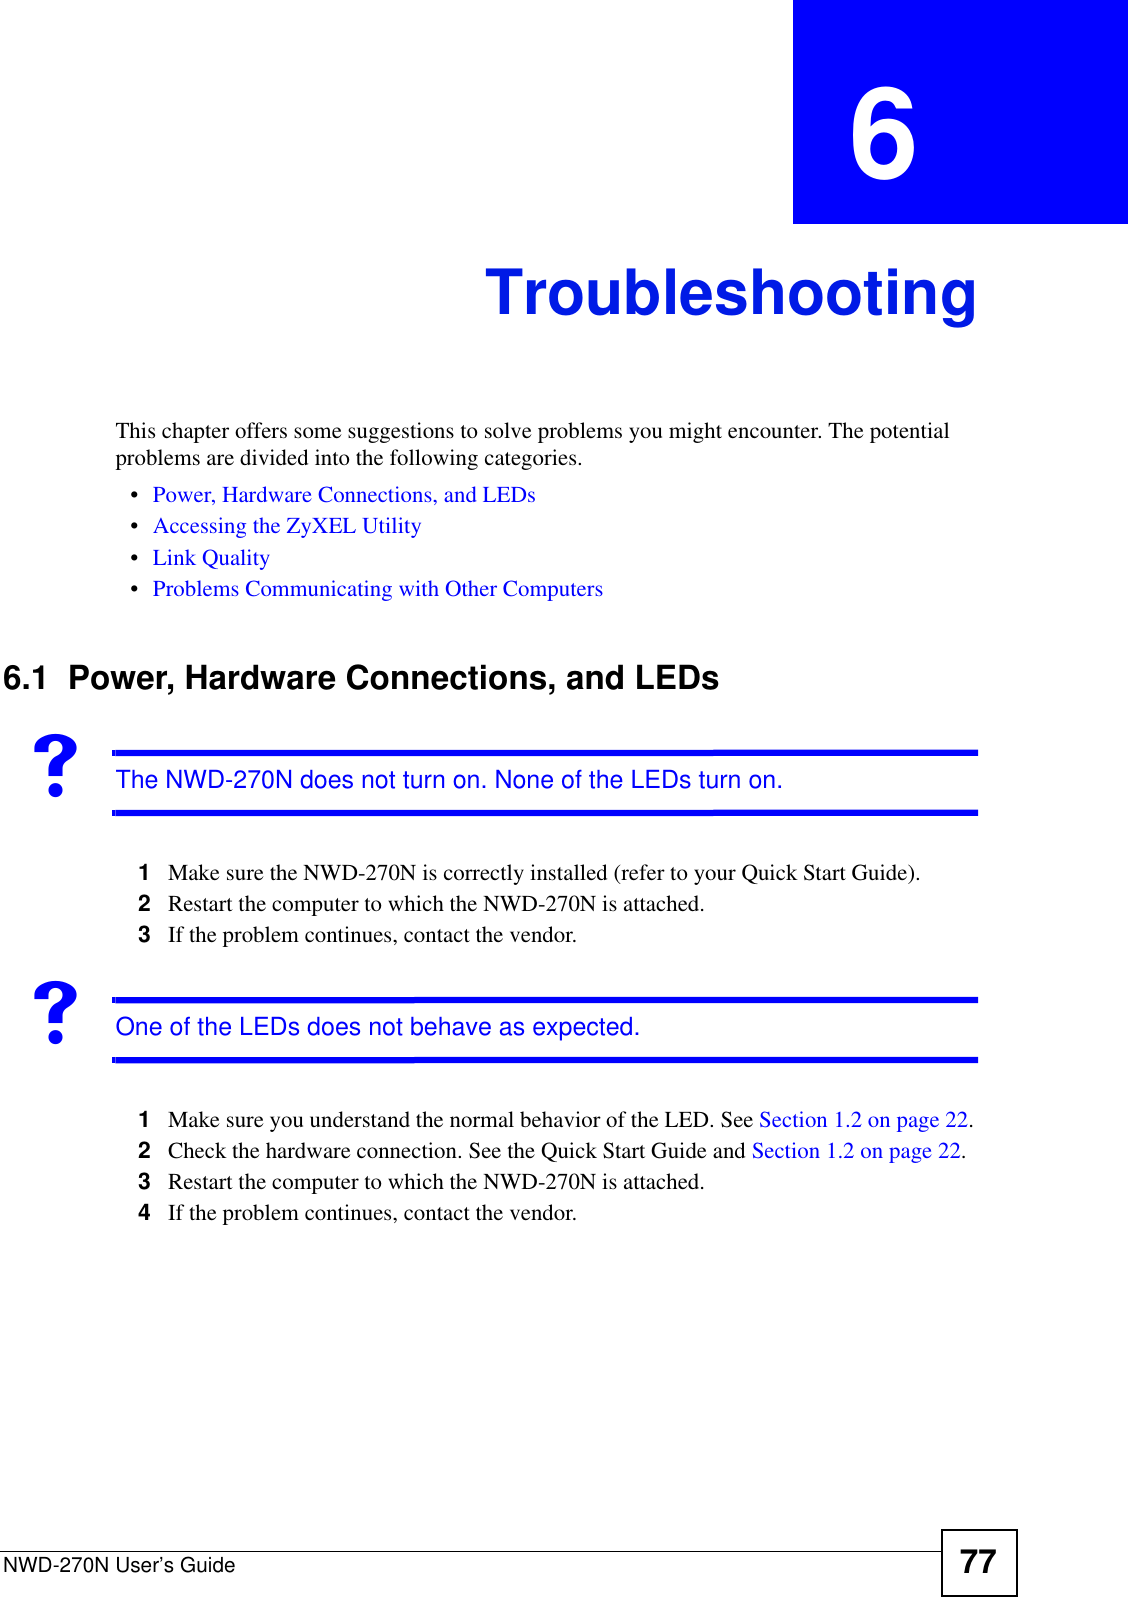 NWD-270N User’s Guide 77CHAPTER  6 TroubleshootingThis chapter offers some suggestions to solve problems you might encounter. The potential problems are divided into the following categories. •Power, Hardware Connections, and LEDs•Accessing the ZyXEL Utility•Link Quality•Problems Communicating with Other Computers6.1  Power, Hardware Connections, and LEDsVThe NWD-270N does not turn on. None of the LEDs turn on.1Make sure the NWD-270N is correctly installed (refer to your Quick Start Guide).2Restart the computer to which the NWD-270N is attached.3If the problem continues, contact the vendor.VOne of the LEDs does not behave as expected.1Make sure you understand the normal behavior of the LED. See Section 1.2 on page 22.2Check the hardware connection. See the Quick Start Guide and Section 1.2 on page 22. 3Restart the computer to which the NWD-270N is attached.4If the problem continues, contact the vendor.